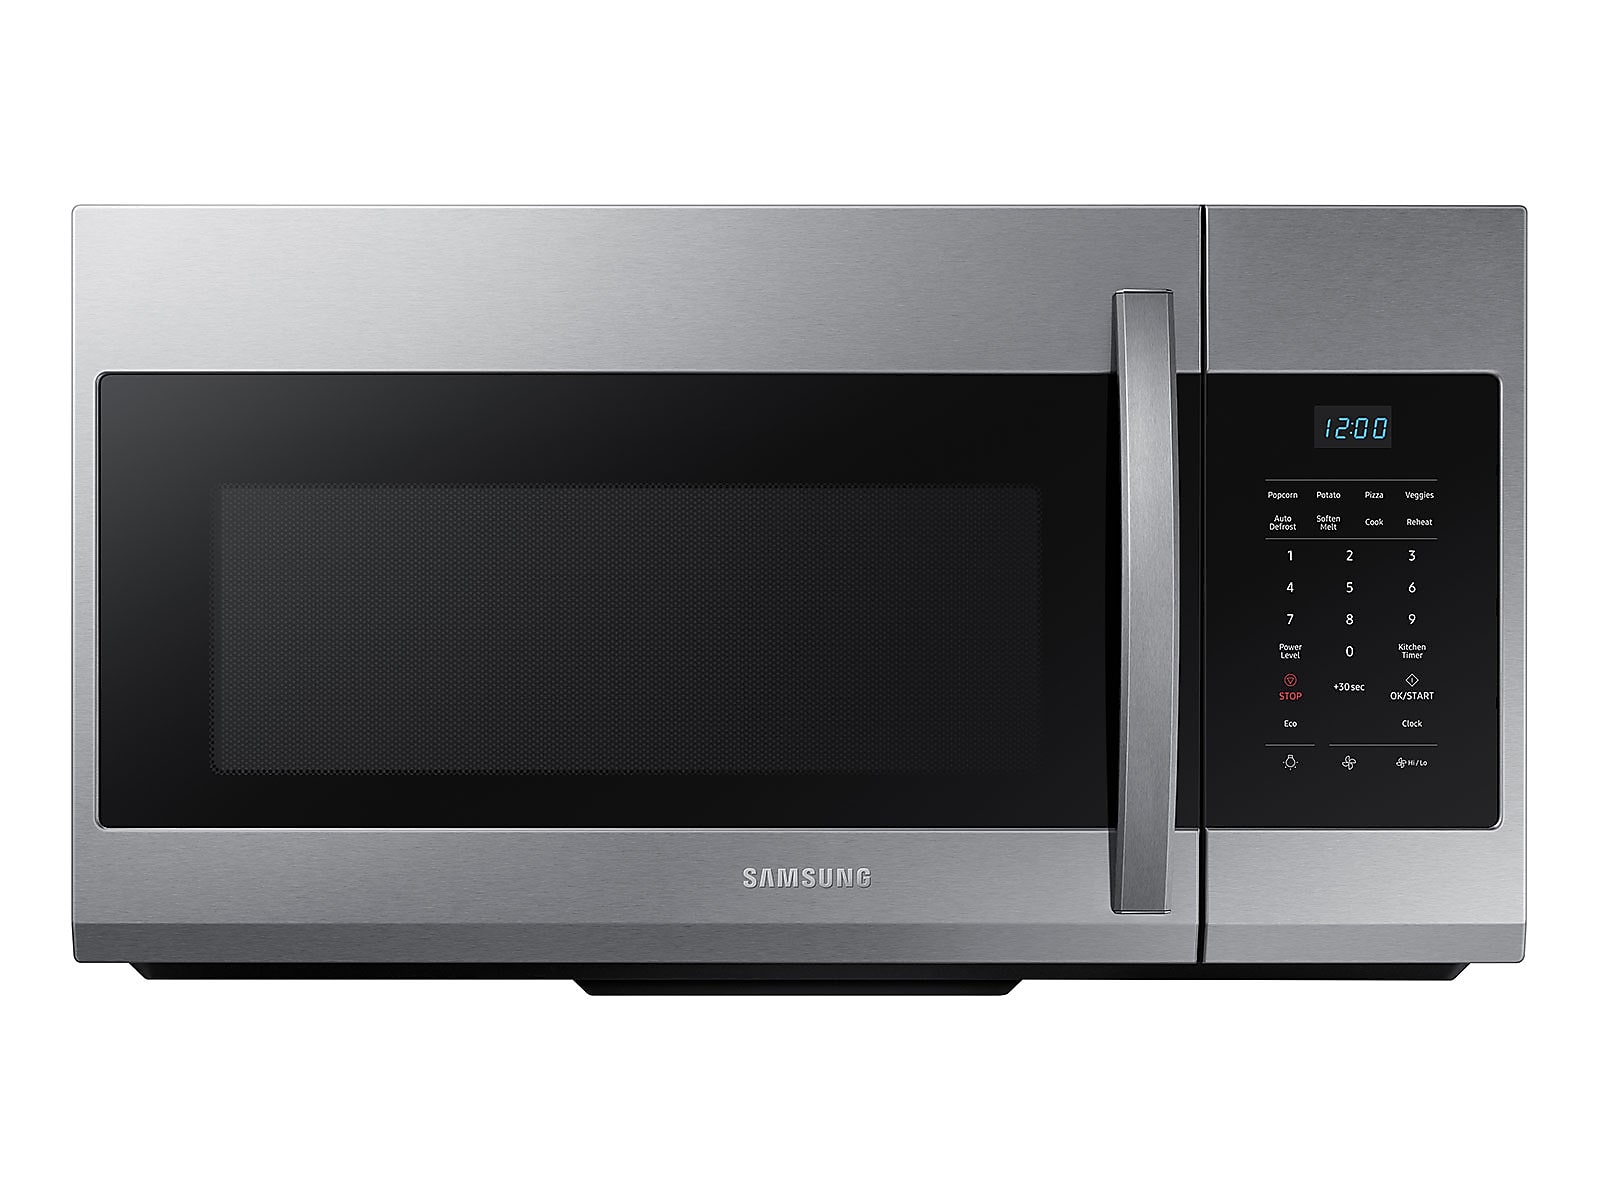 Samsung 1.7 cu. ft. Over-the-Range Microwave in Stainless Steel(ME17R7021ES/AA) photo